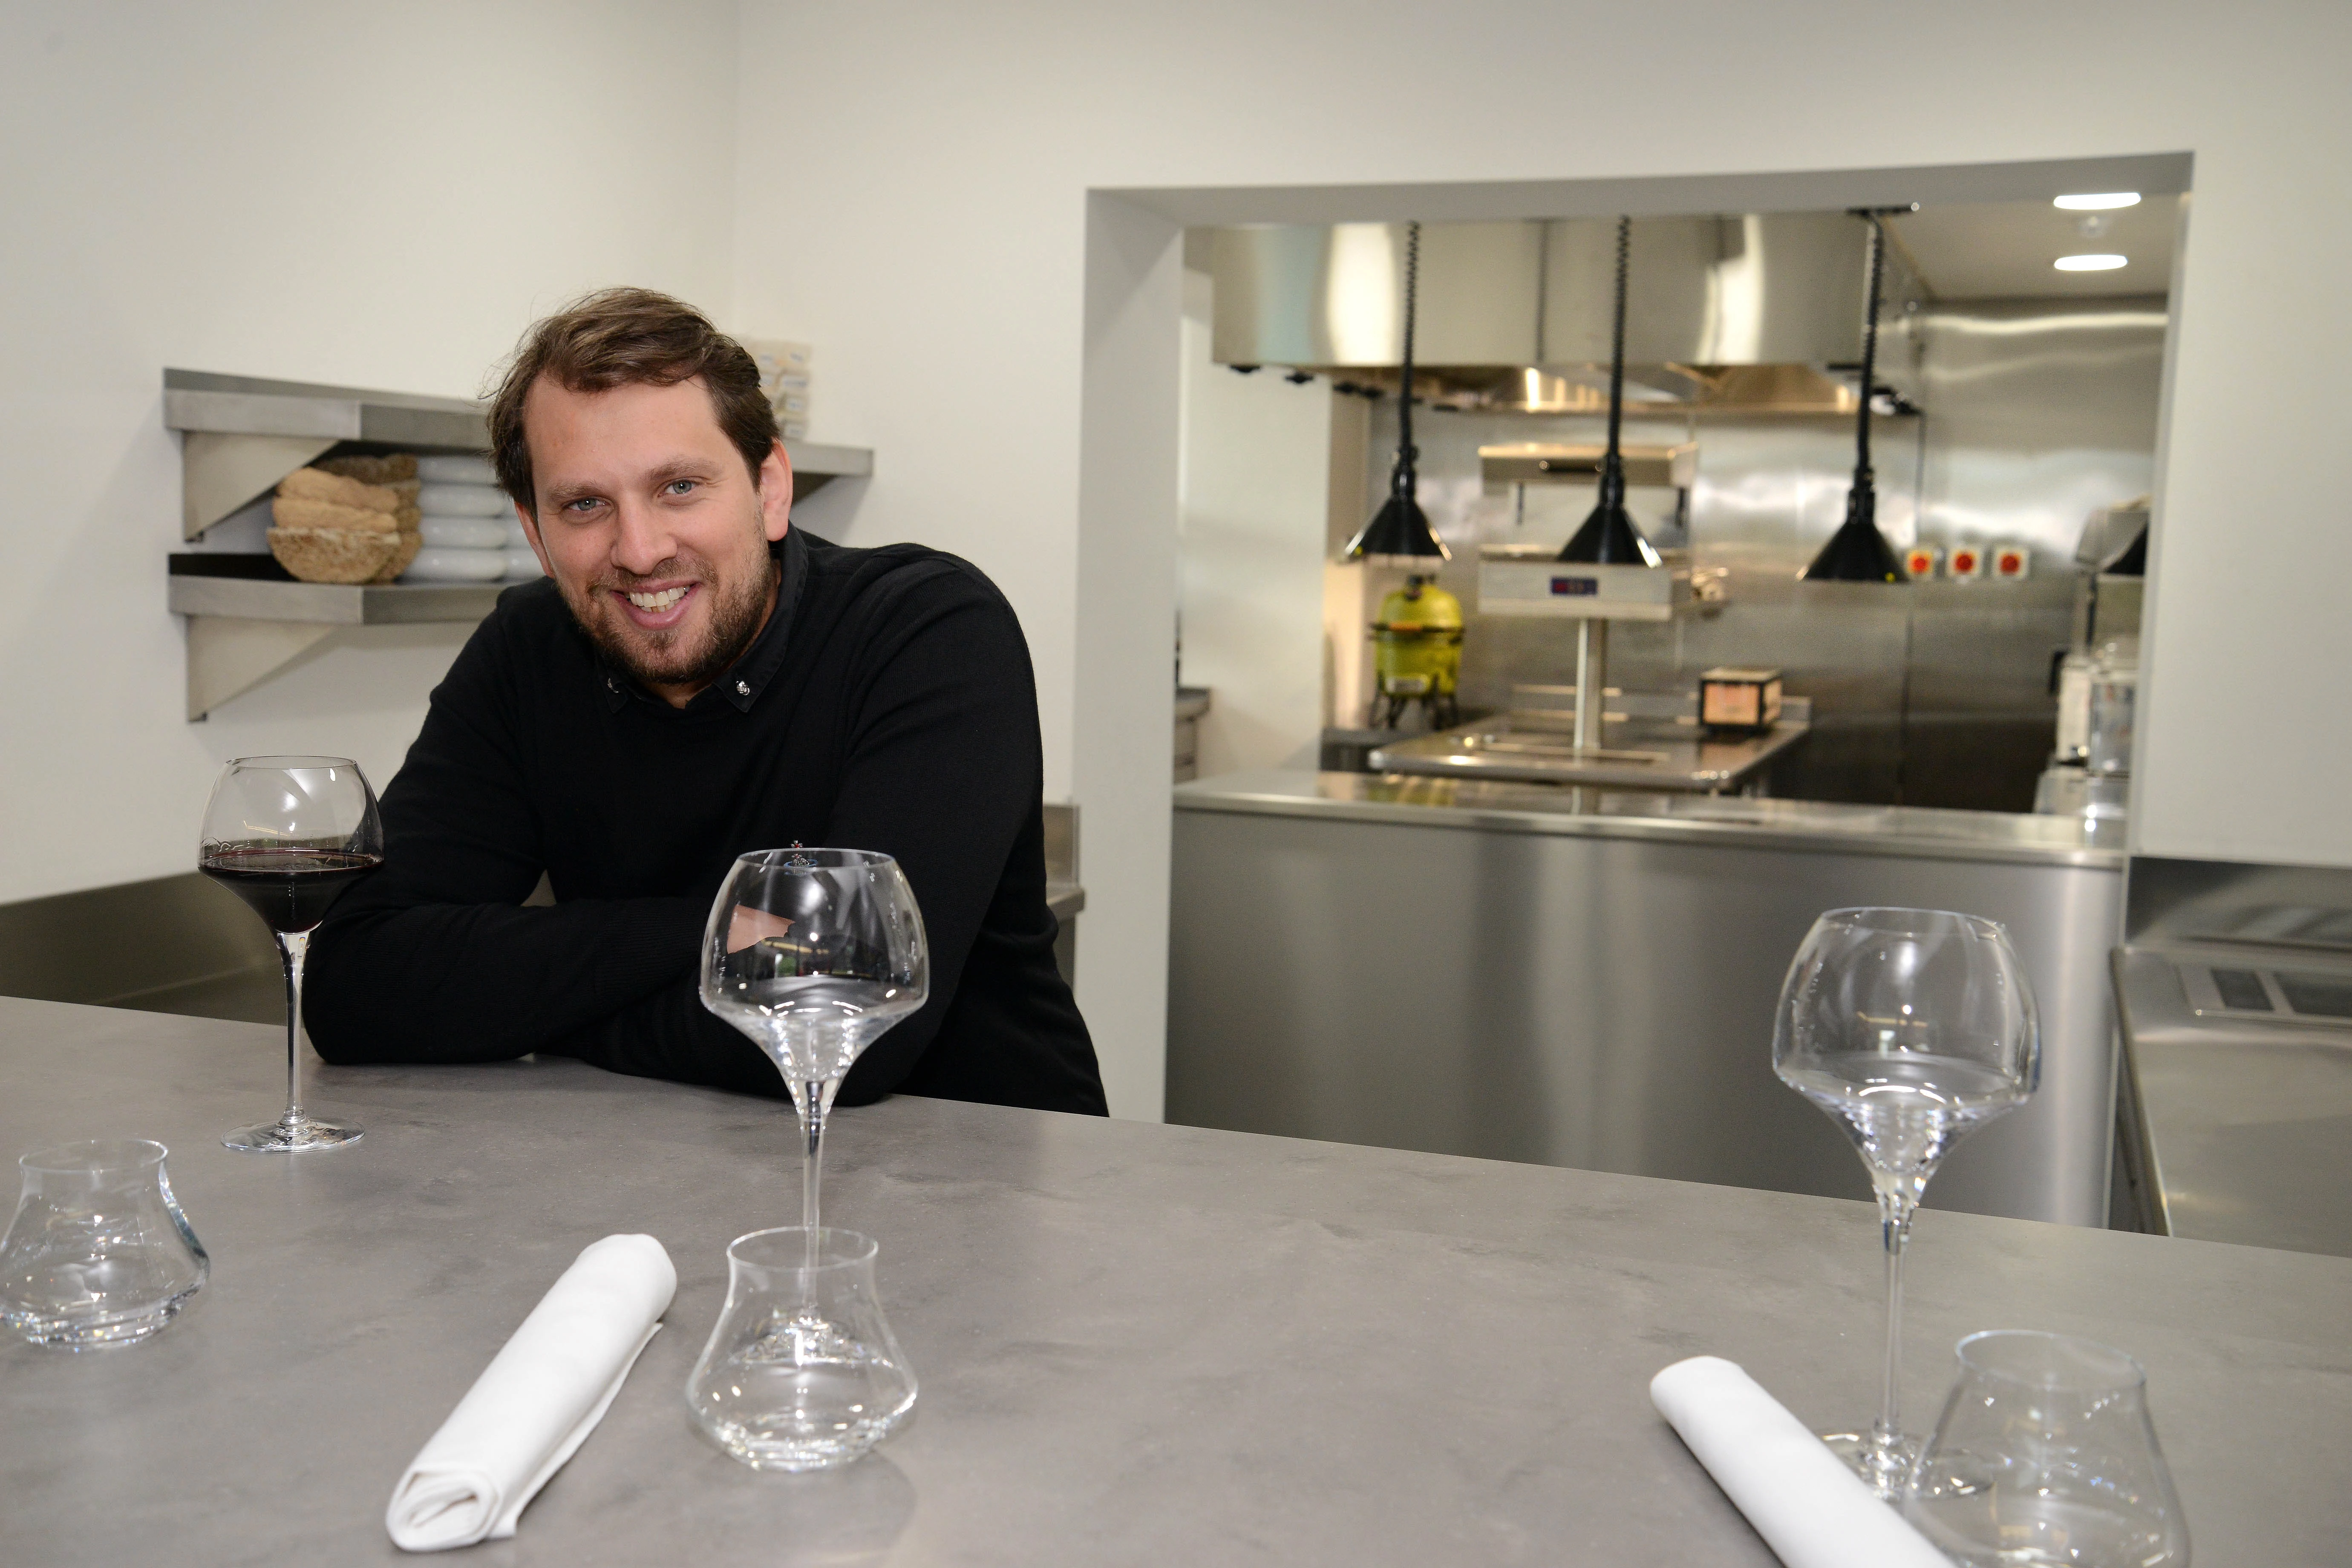 2Raby Hunt - Two Michelin star chef James Close of The Raby Hunt at Summerhouse, County Durham, in the new £200,000 kitchen